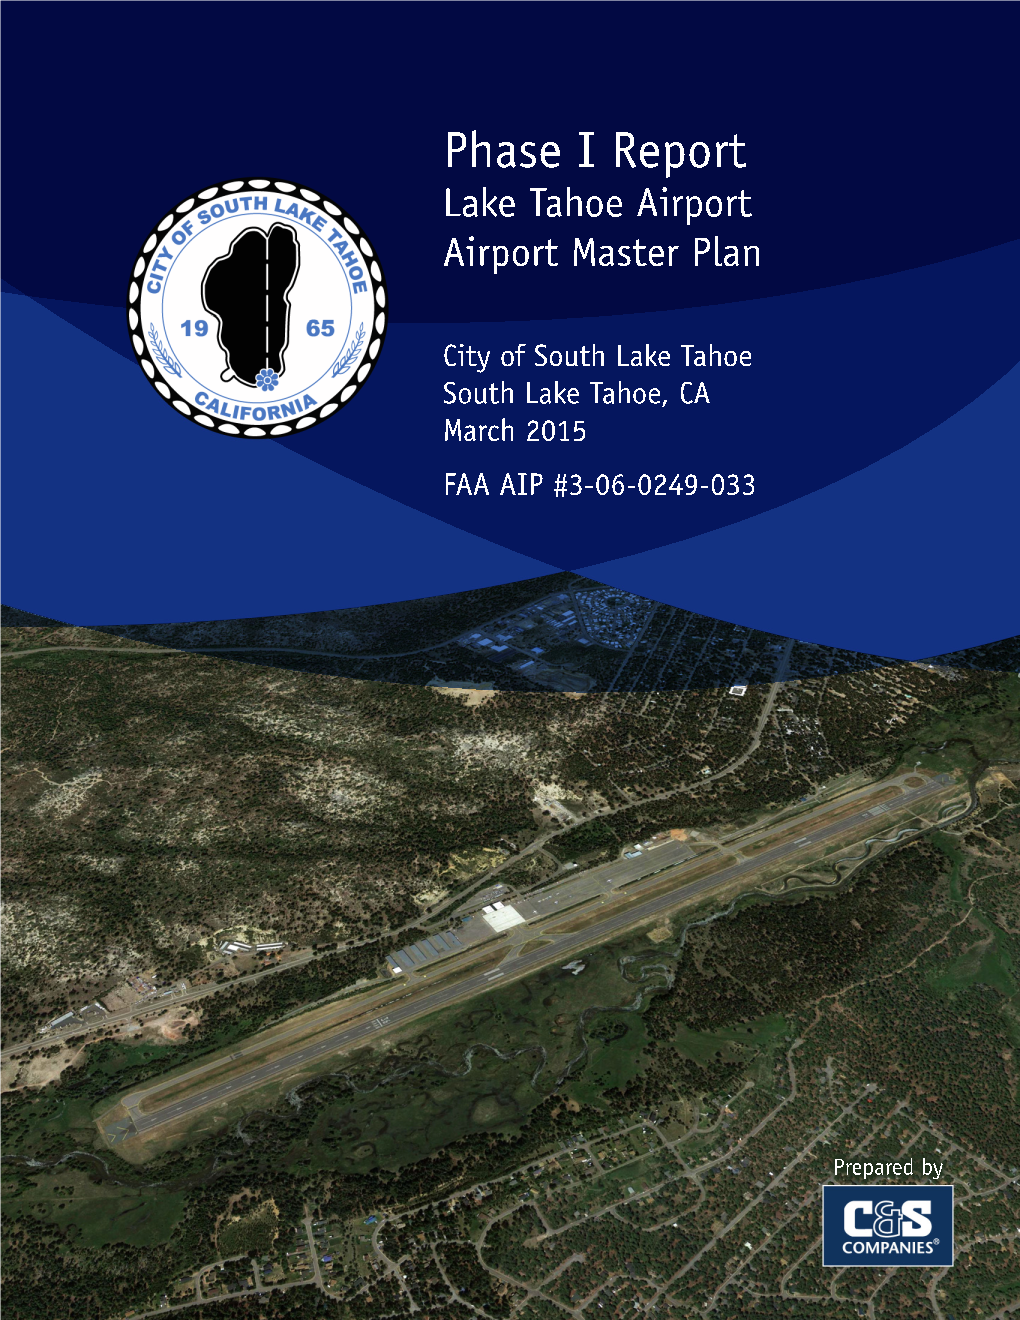 Airport Master Plan Update Phase I Report